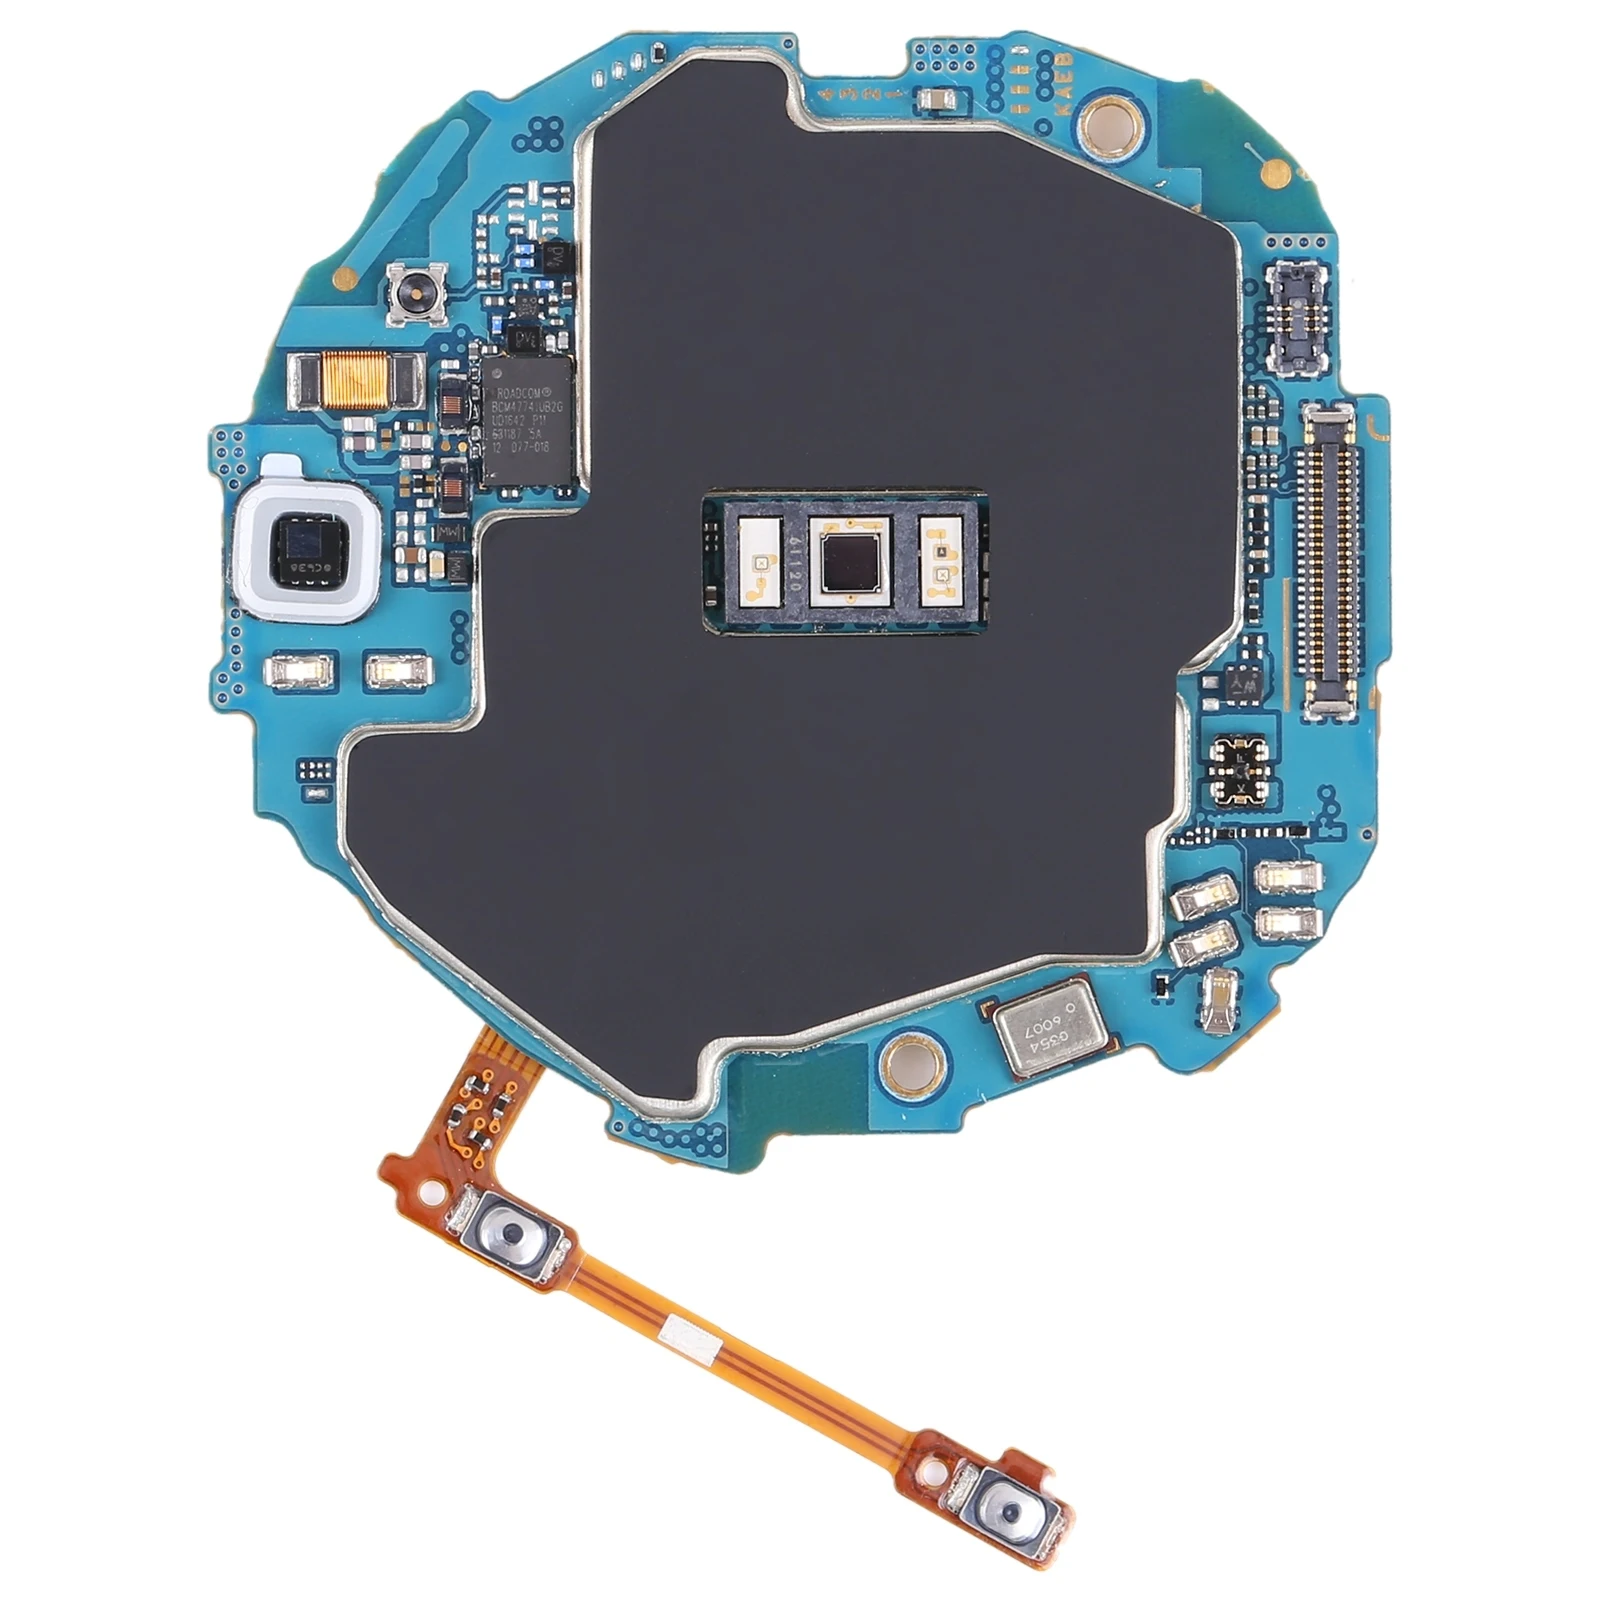 

Motherboard for Samsung Gear S3 Classic SM-R770 / Samsung Gear S3 classic LTE SM-R775S Watch Board Repair Replace Part